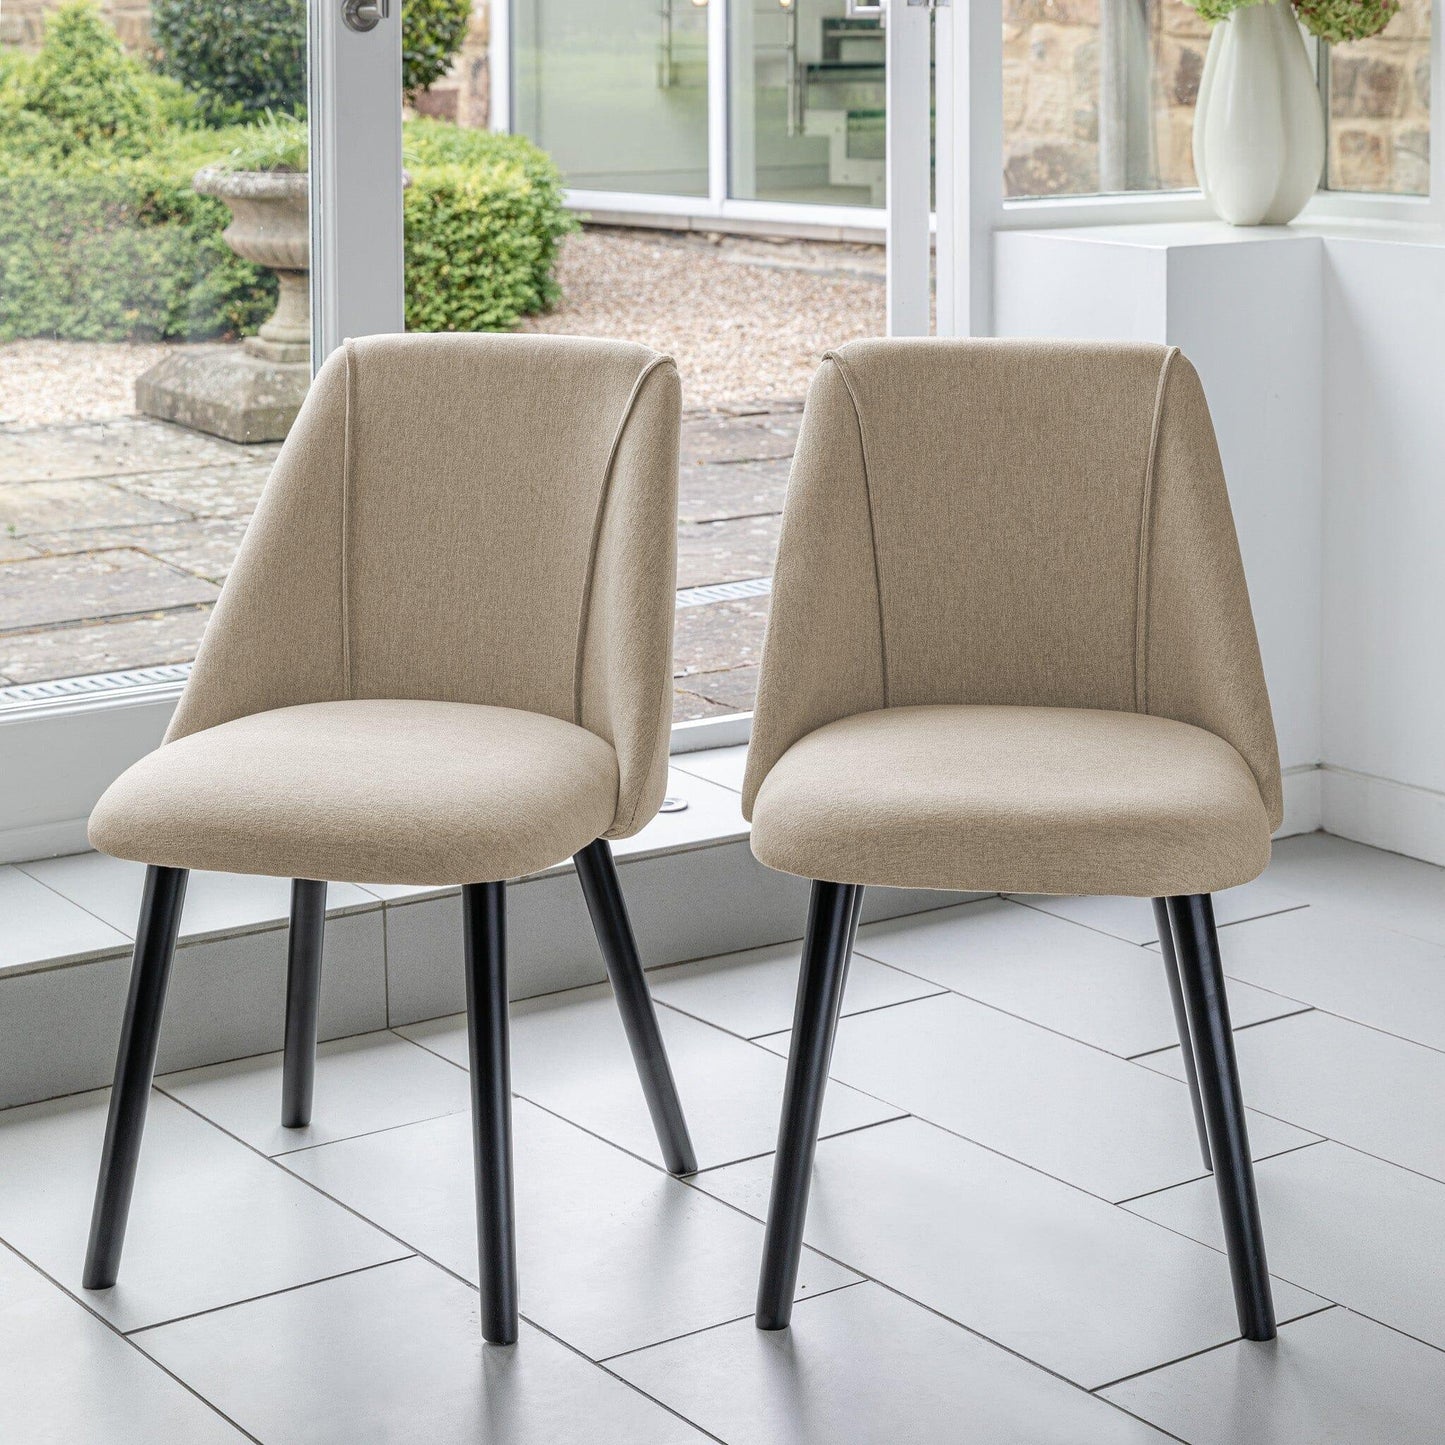 Freya dining chairs - set of 2 - oatmeal and black - Laura James